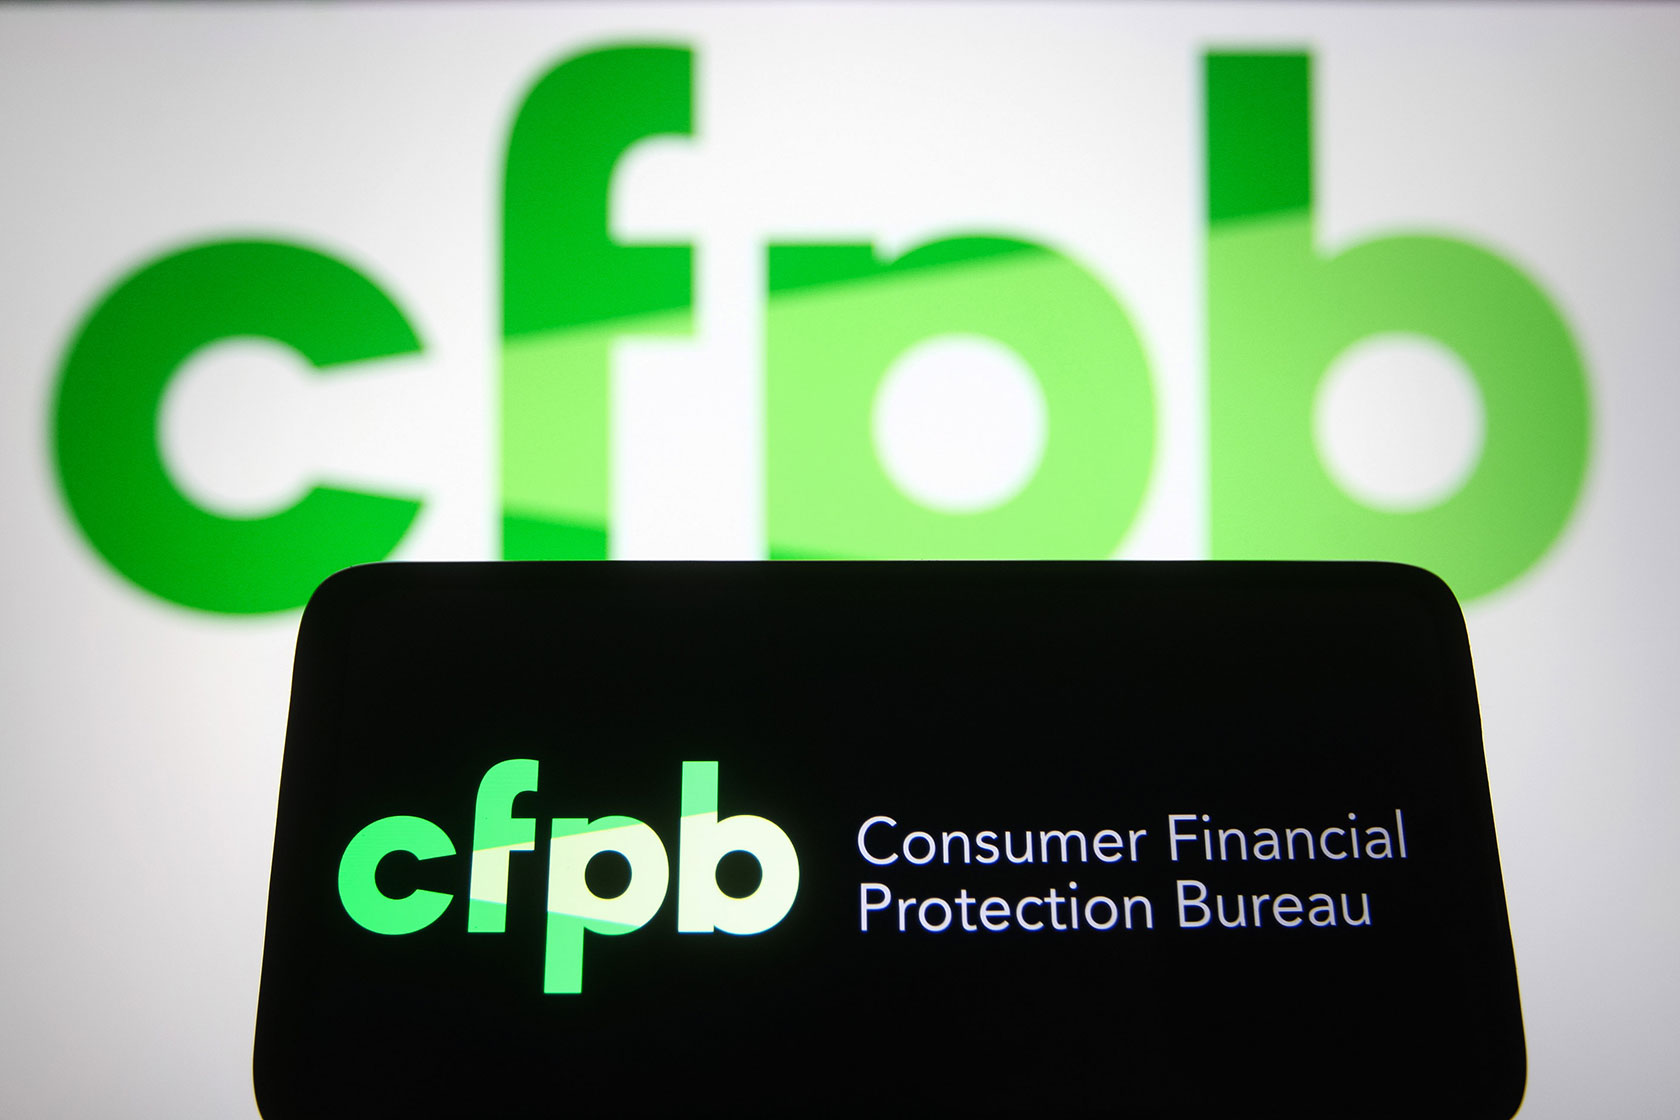 Photo shows the CFPB lime-green logo against a black background on a smartphone, with a larger white screen displaying the green CFPB logo in the background